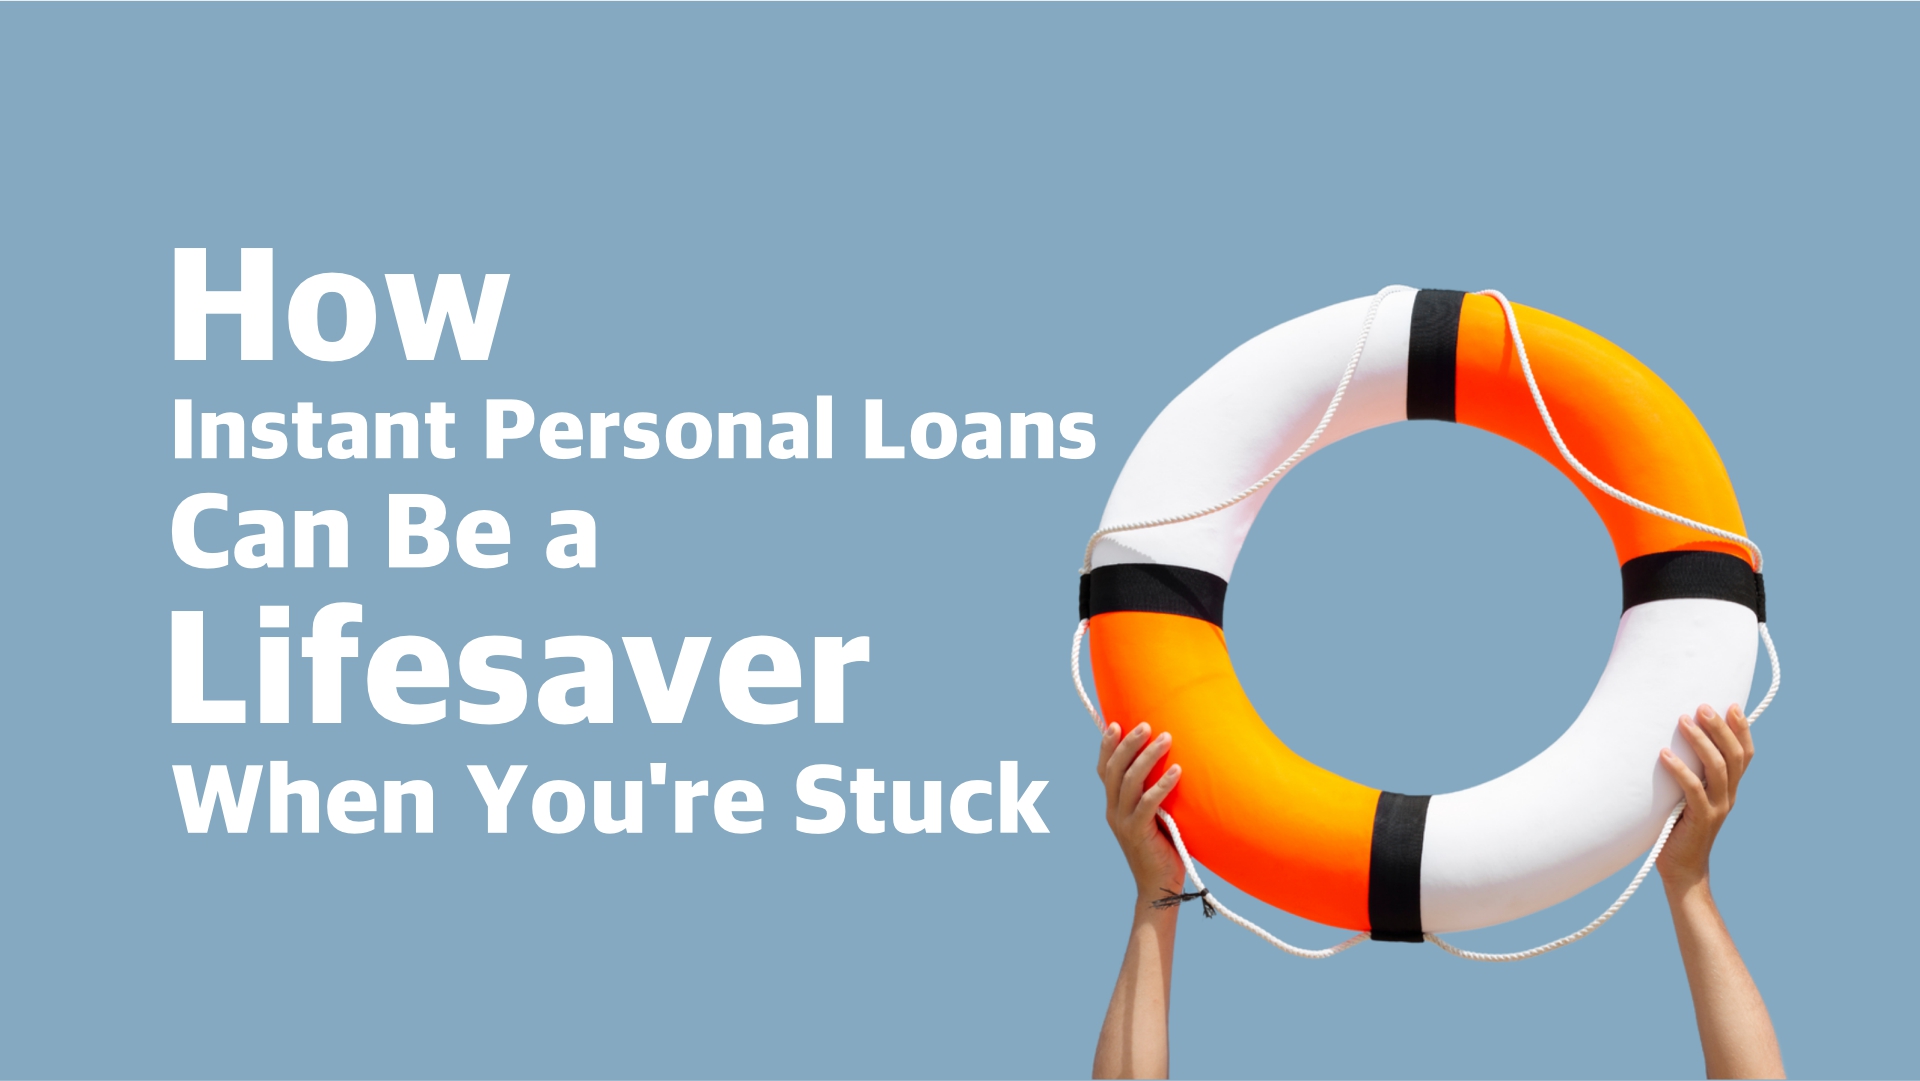 How Instant Personal Loans Can Be a Lifesaver When You’re Stuck